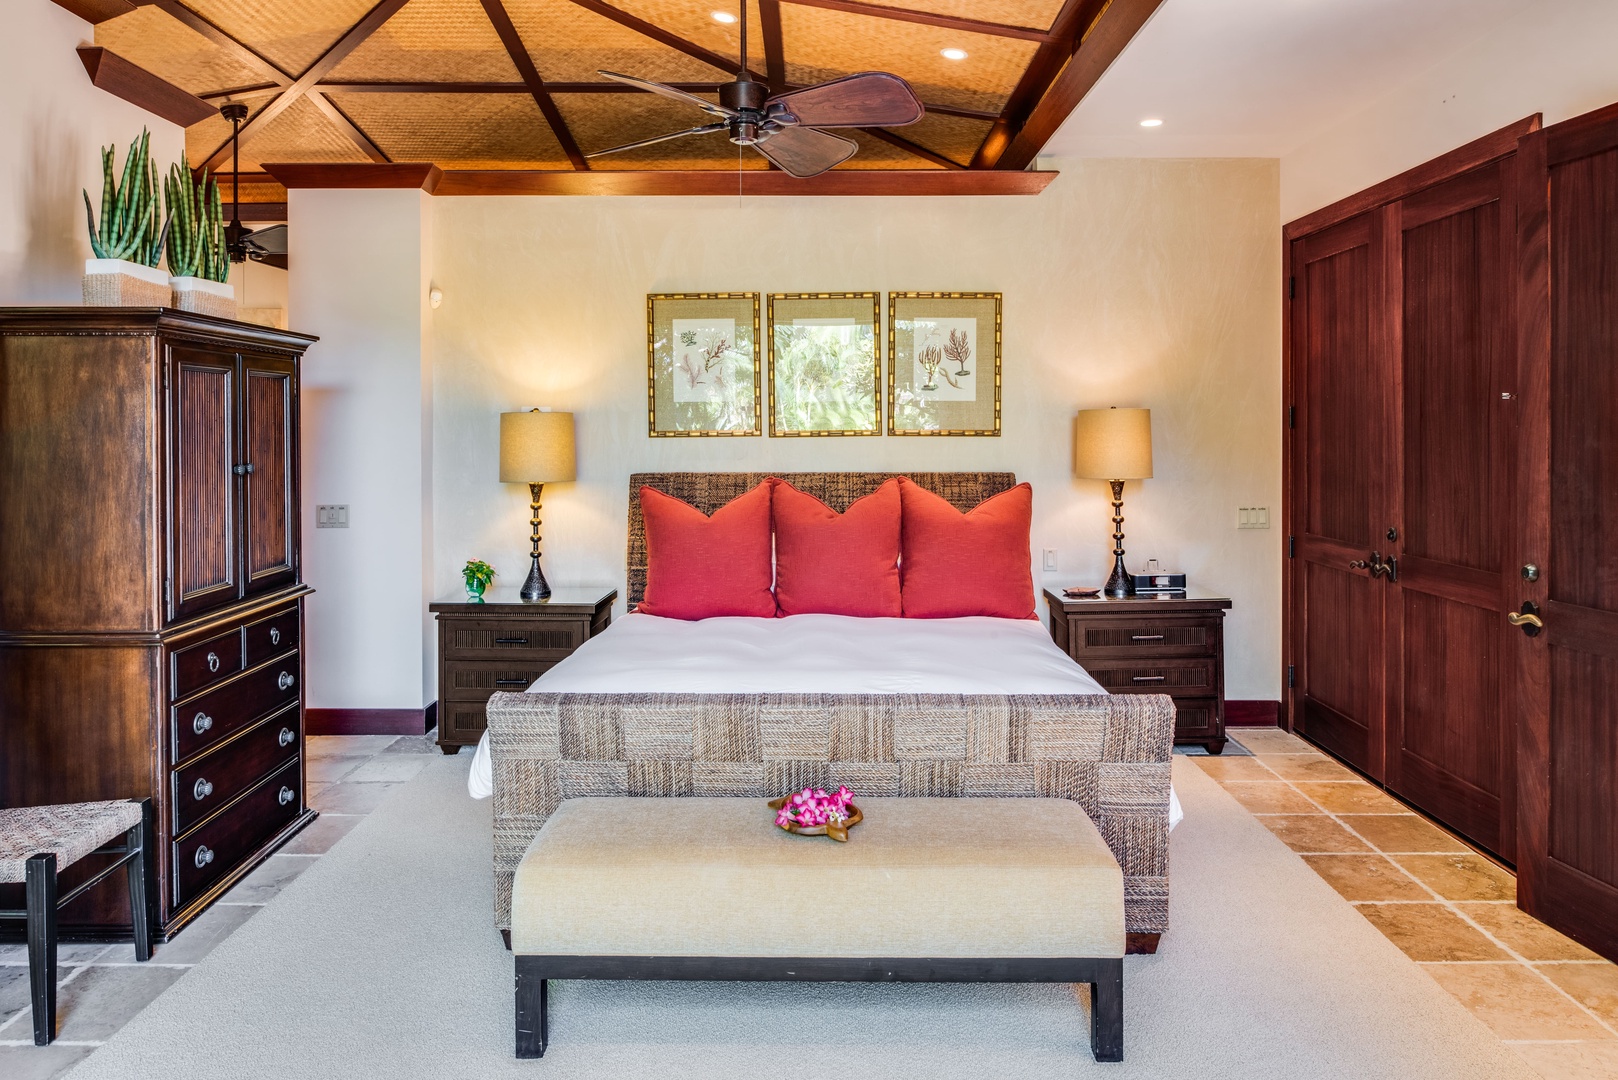 Kamuela Vacation Rentals, House of the Turtle at Champion Ridge, Mauna Lani (CR 18) - The primary suite offers a king-sized bed, TV and ensuite bathroom.